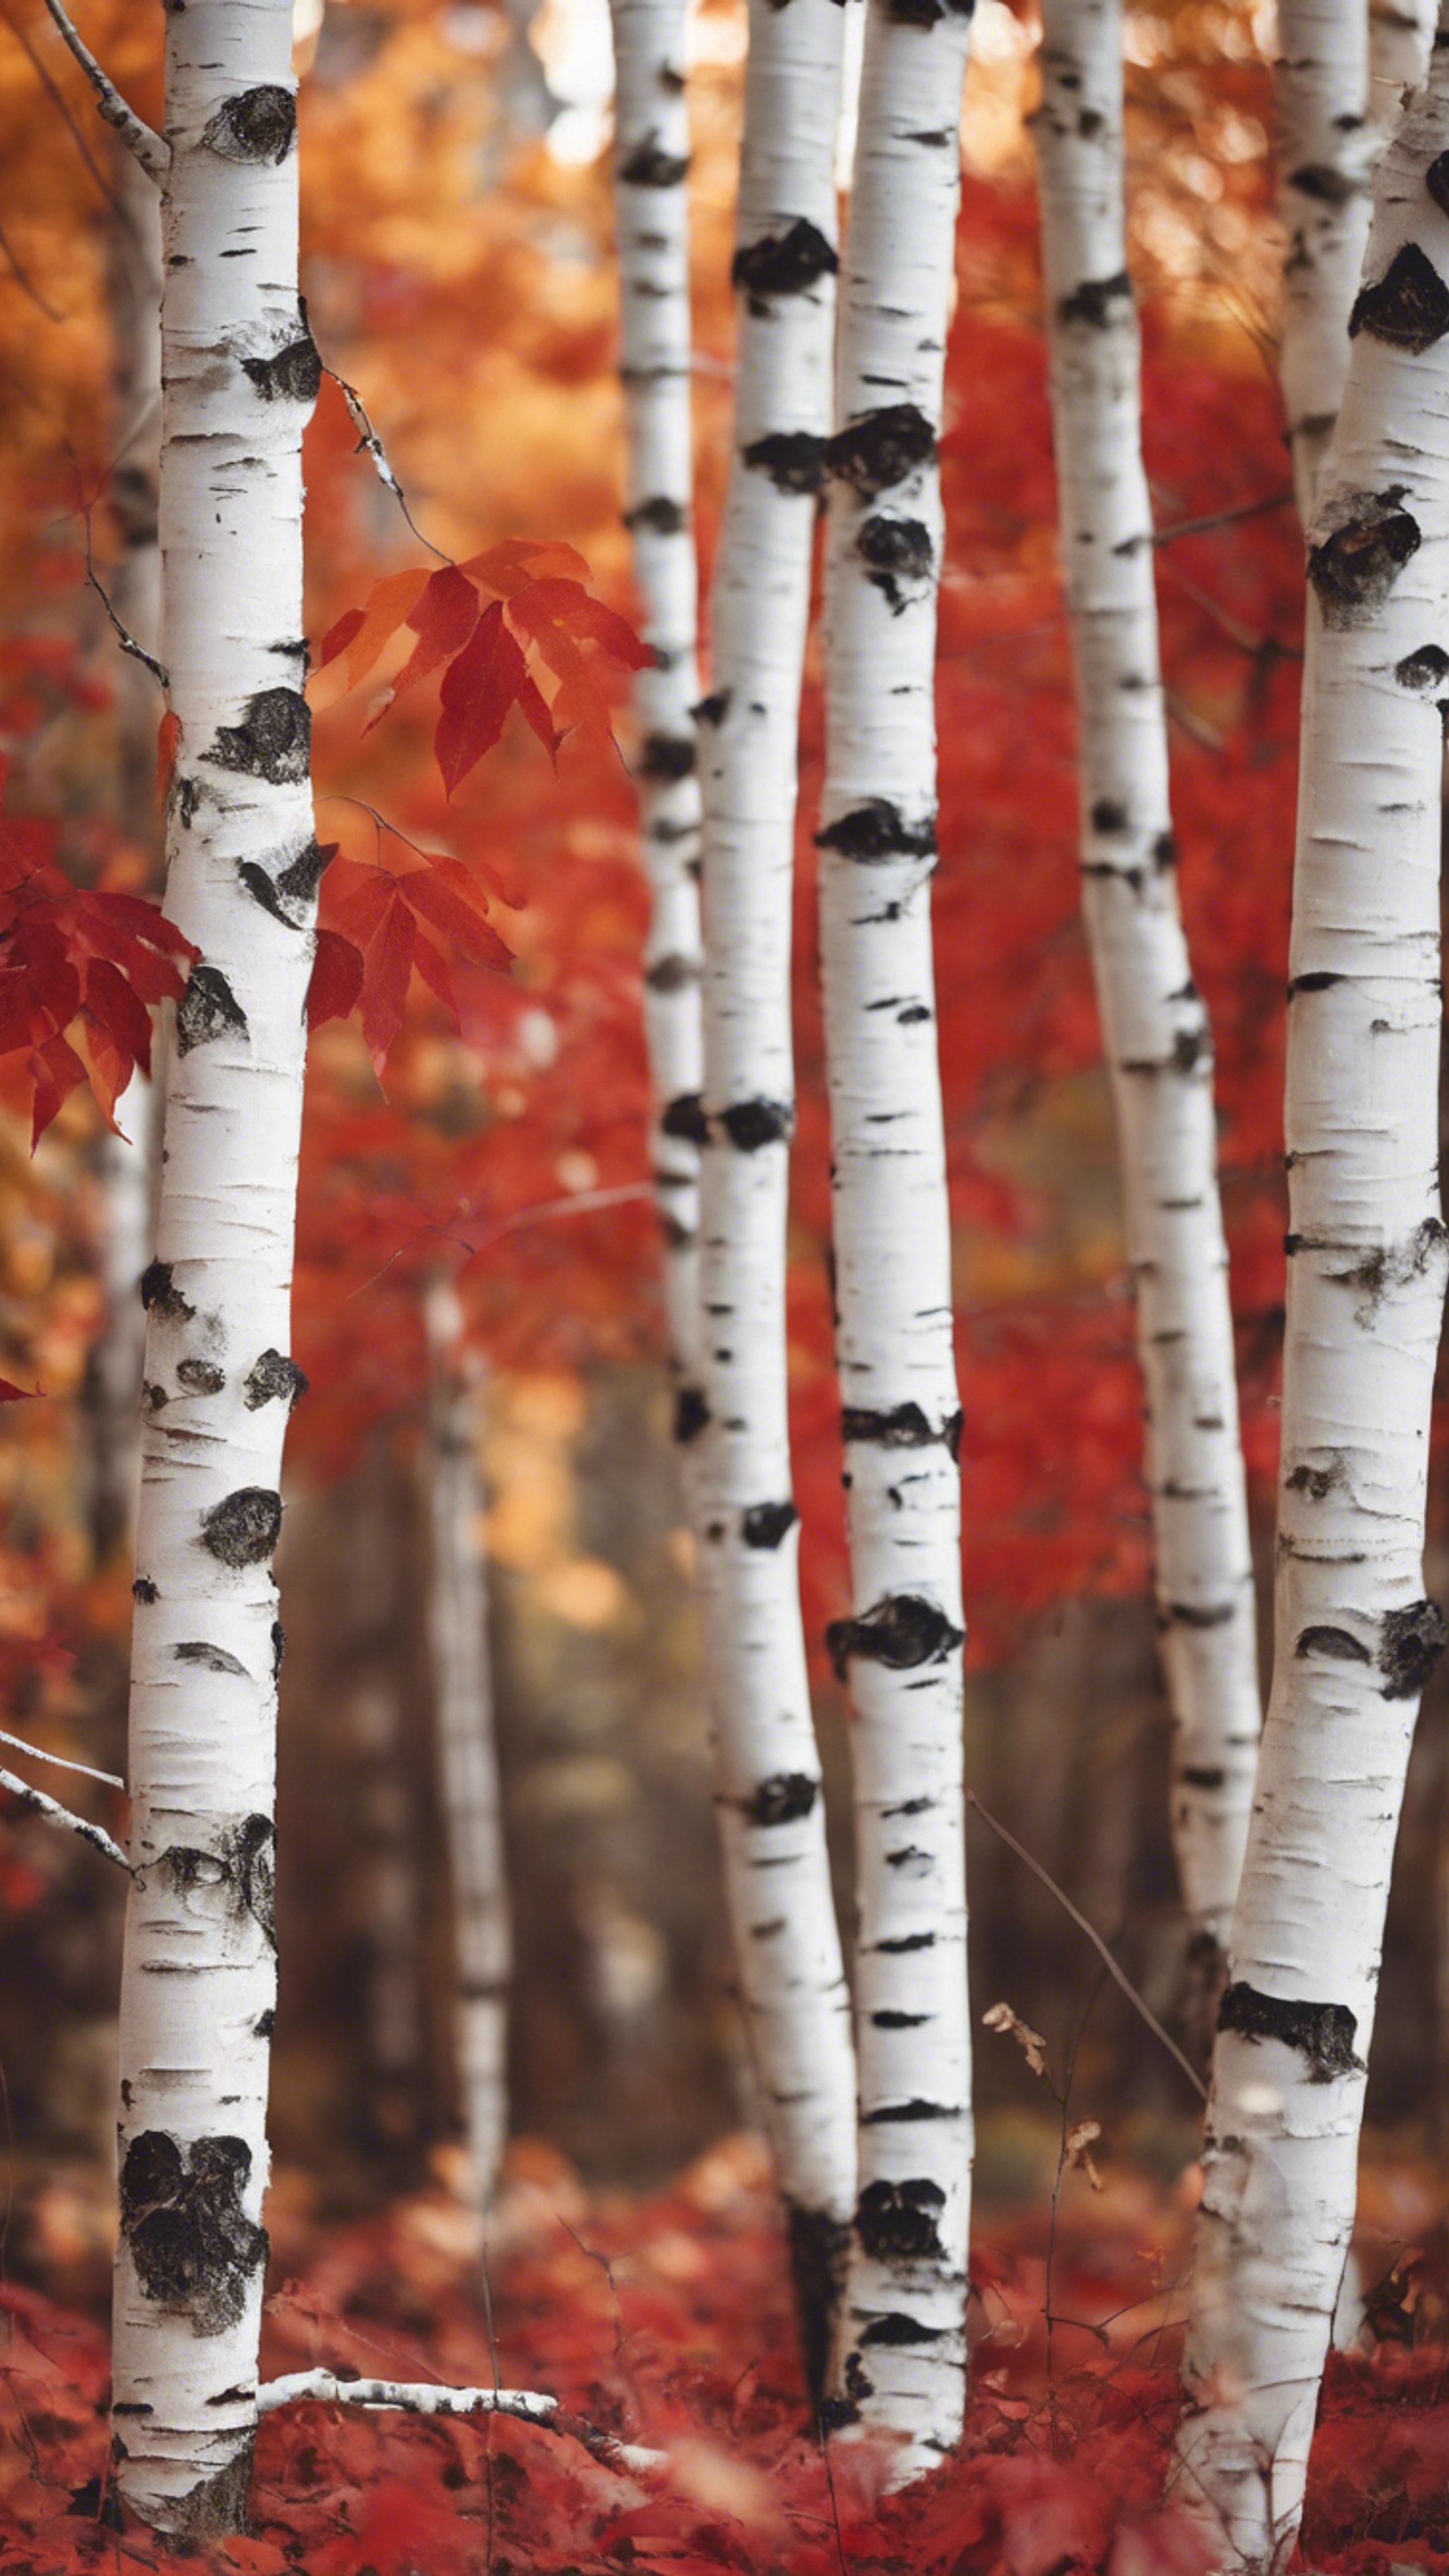 Fall scenes with white birches decked with autumn red foliage. Fond d'écran[2b263cdc55c54552b5f9]